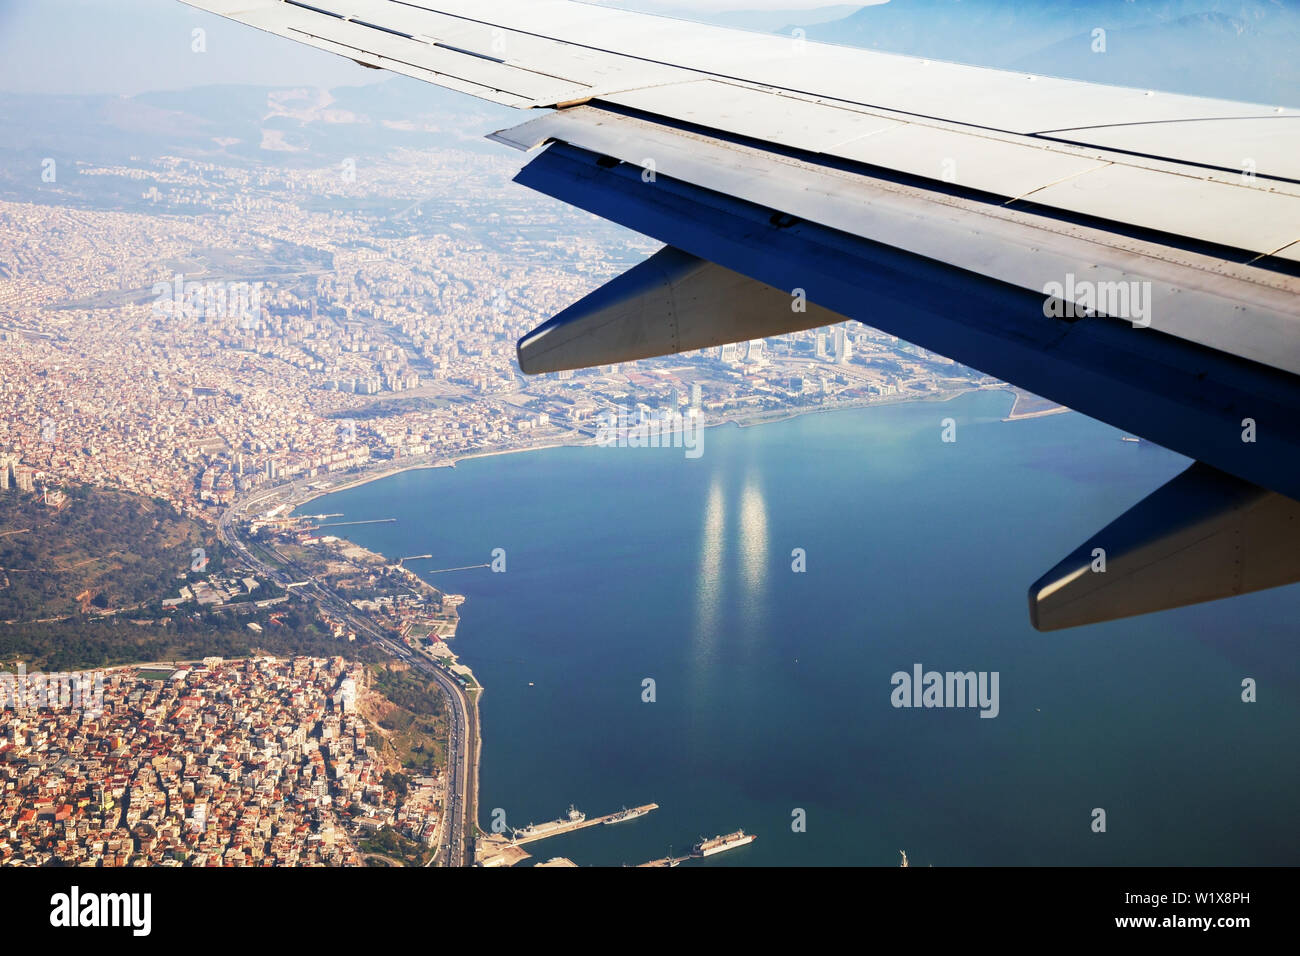 View of Izmir from the aircraft window Stock Photo